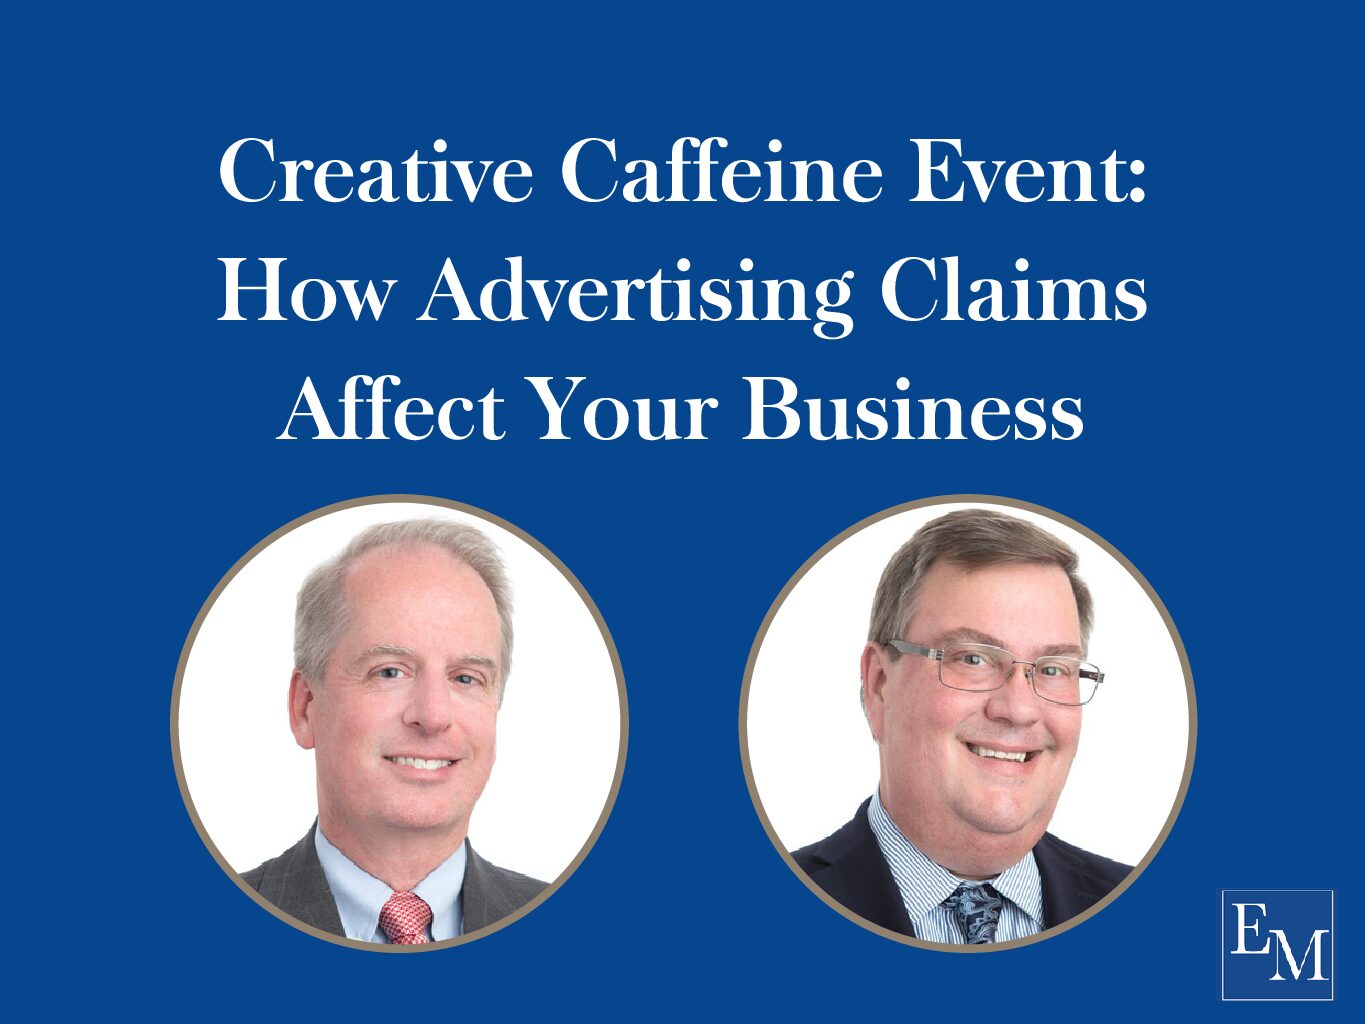 Creative Caffeine Event July 24th, 2018 at 7:30-9:30 am How advertising claims affect your business